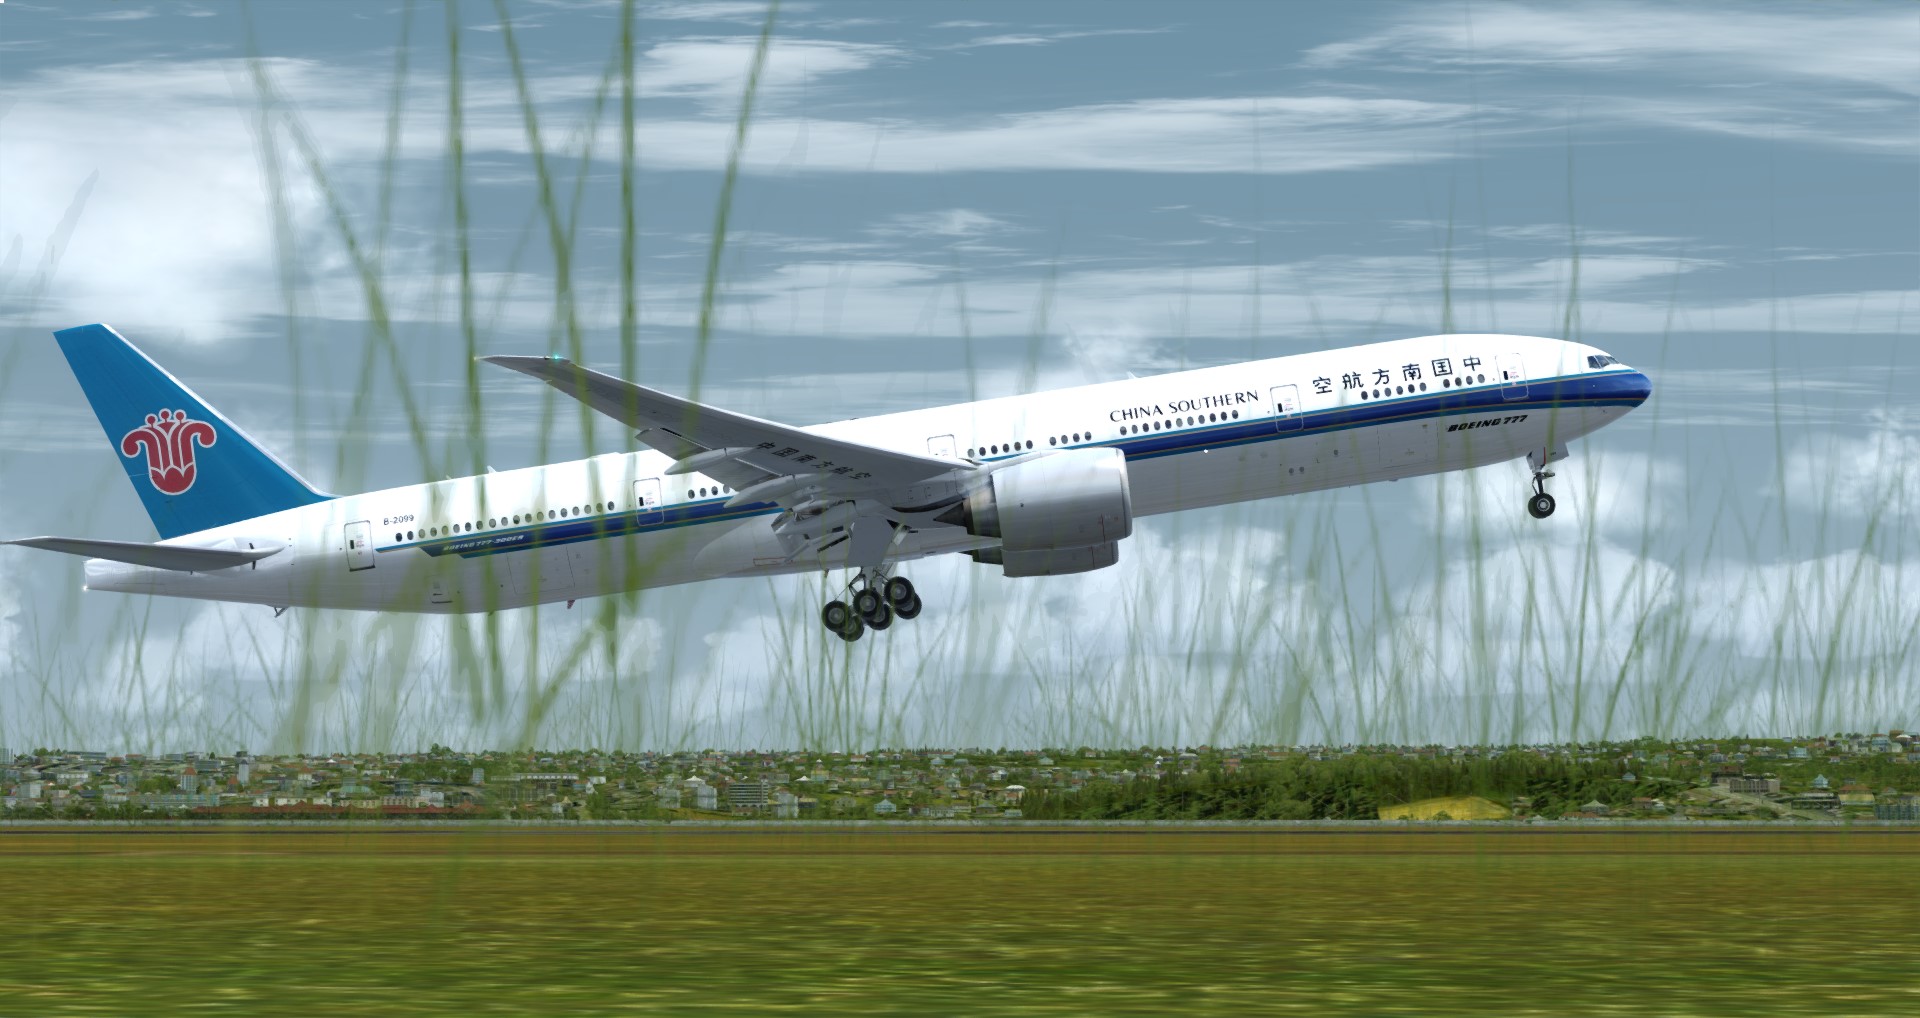 P3D V4 77W China Southern Airlines WADD-ZGGG 营救同胞-7259 